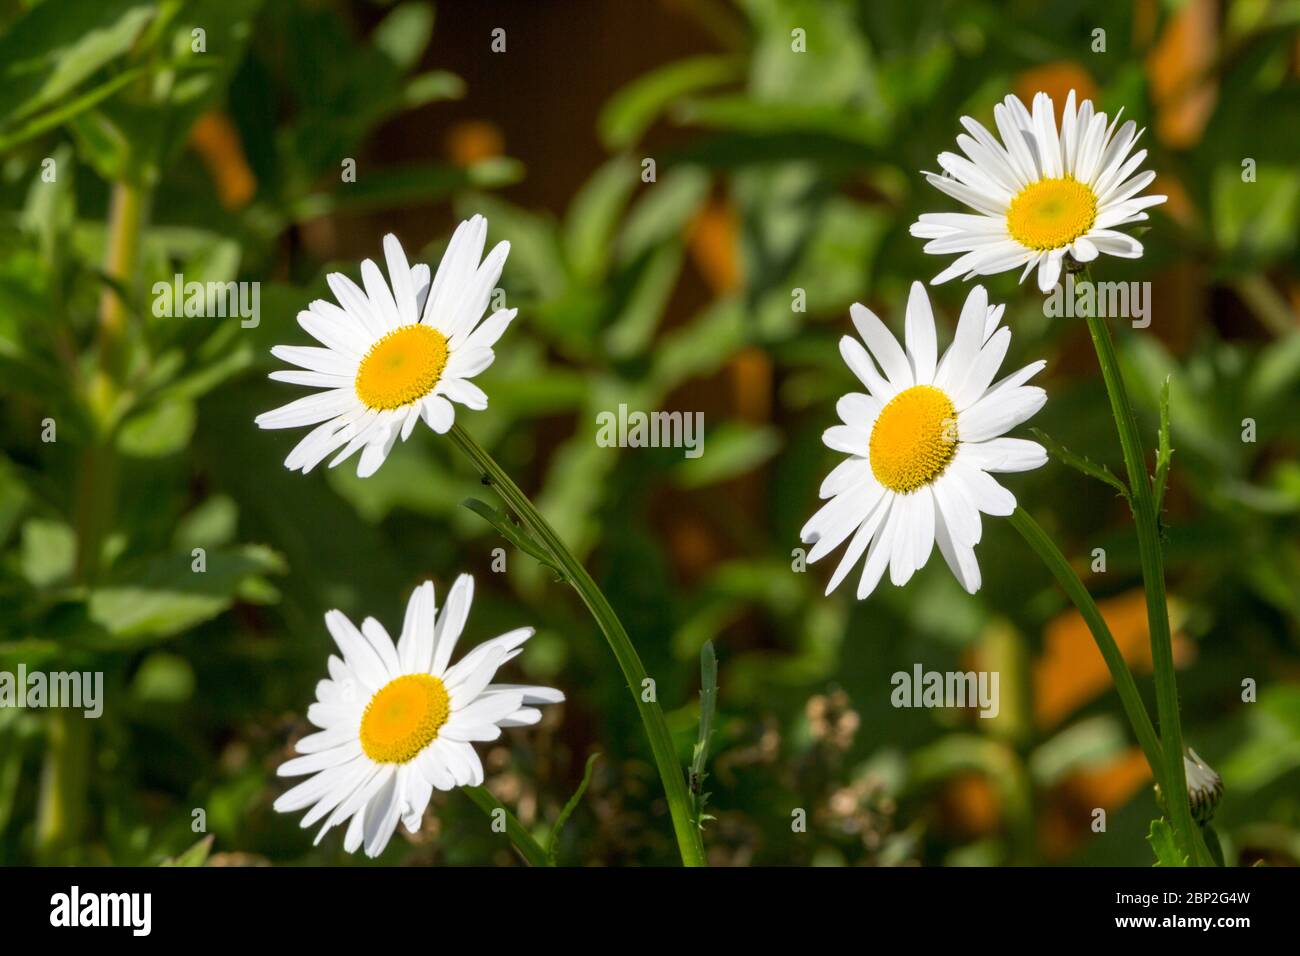 Oxeye Daisy (Leucanthemum vulgare) large raised yellow centres with multiple long white narrow petals long stems with smaller pinnately lobed leaves Stock Photo